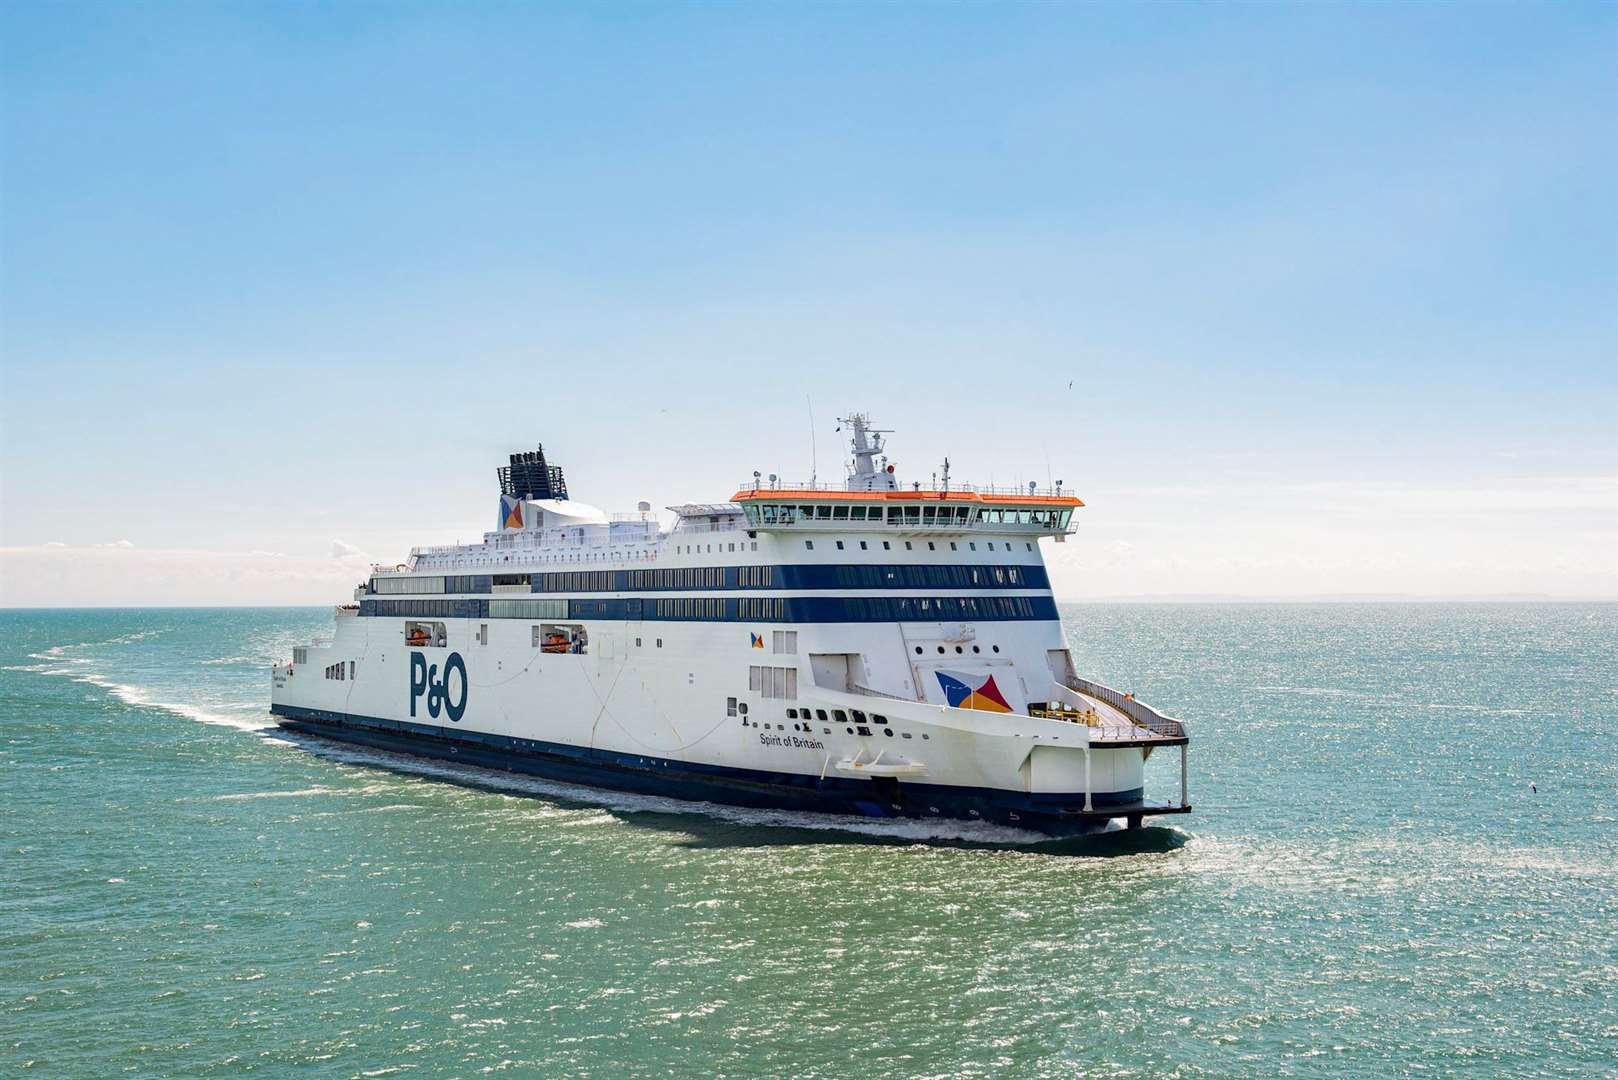 Ferries from Dover to France are being suspended tomorrow